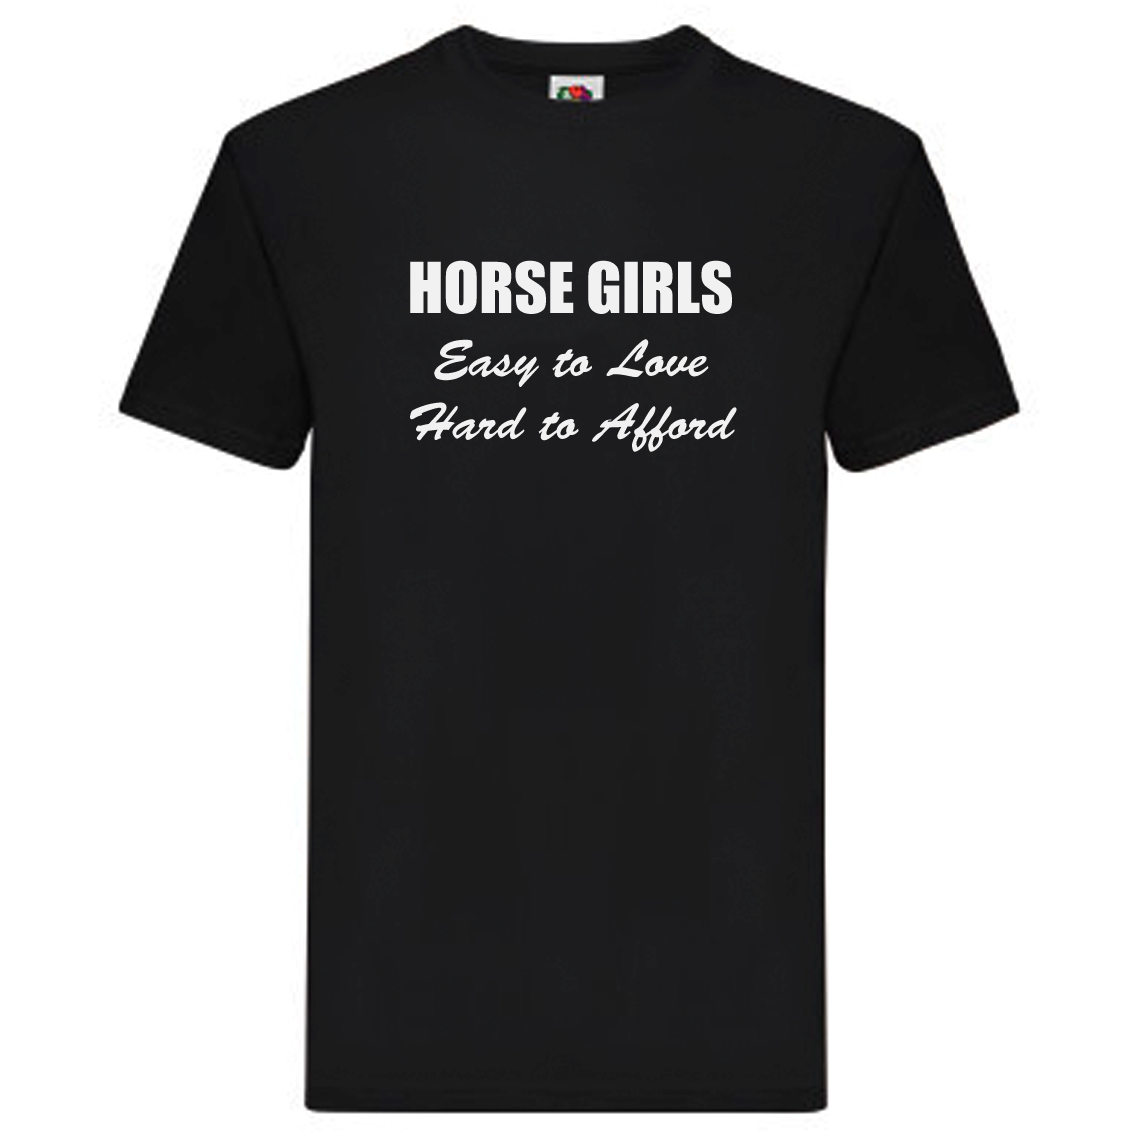 T-Shirt - Horse Girls, Easy to Love, Hard to Afford